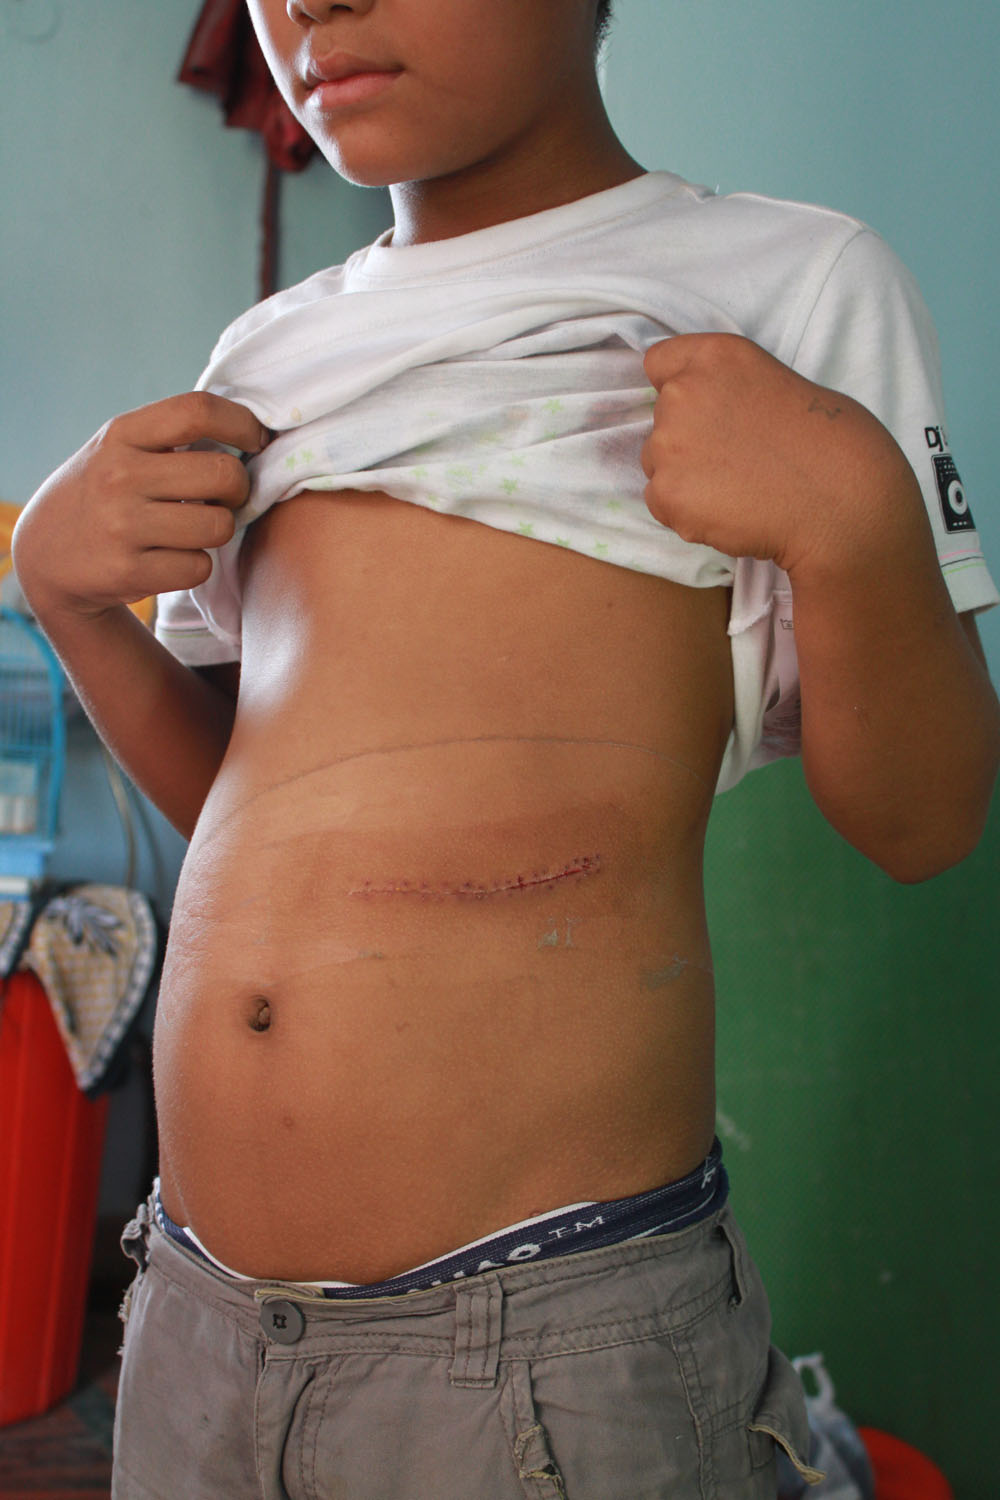 The witness in W’s case with slashed abdomen. The stiches opened on a day before he was photographed.